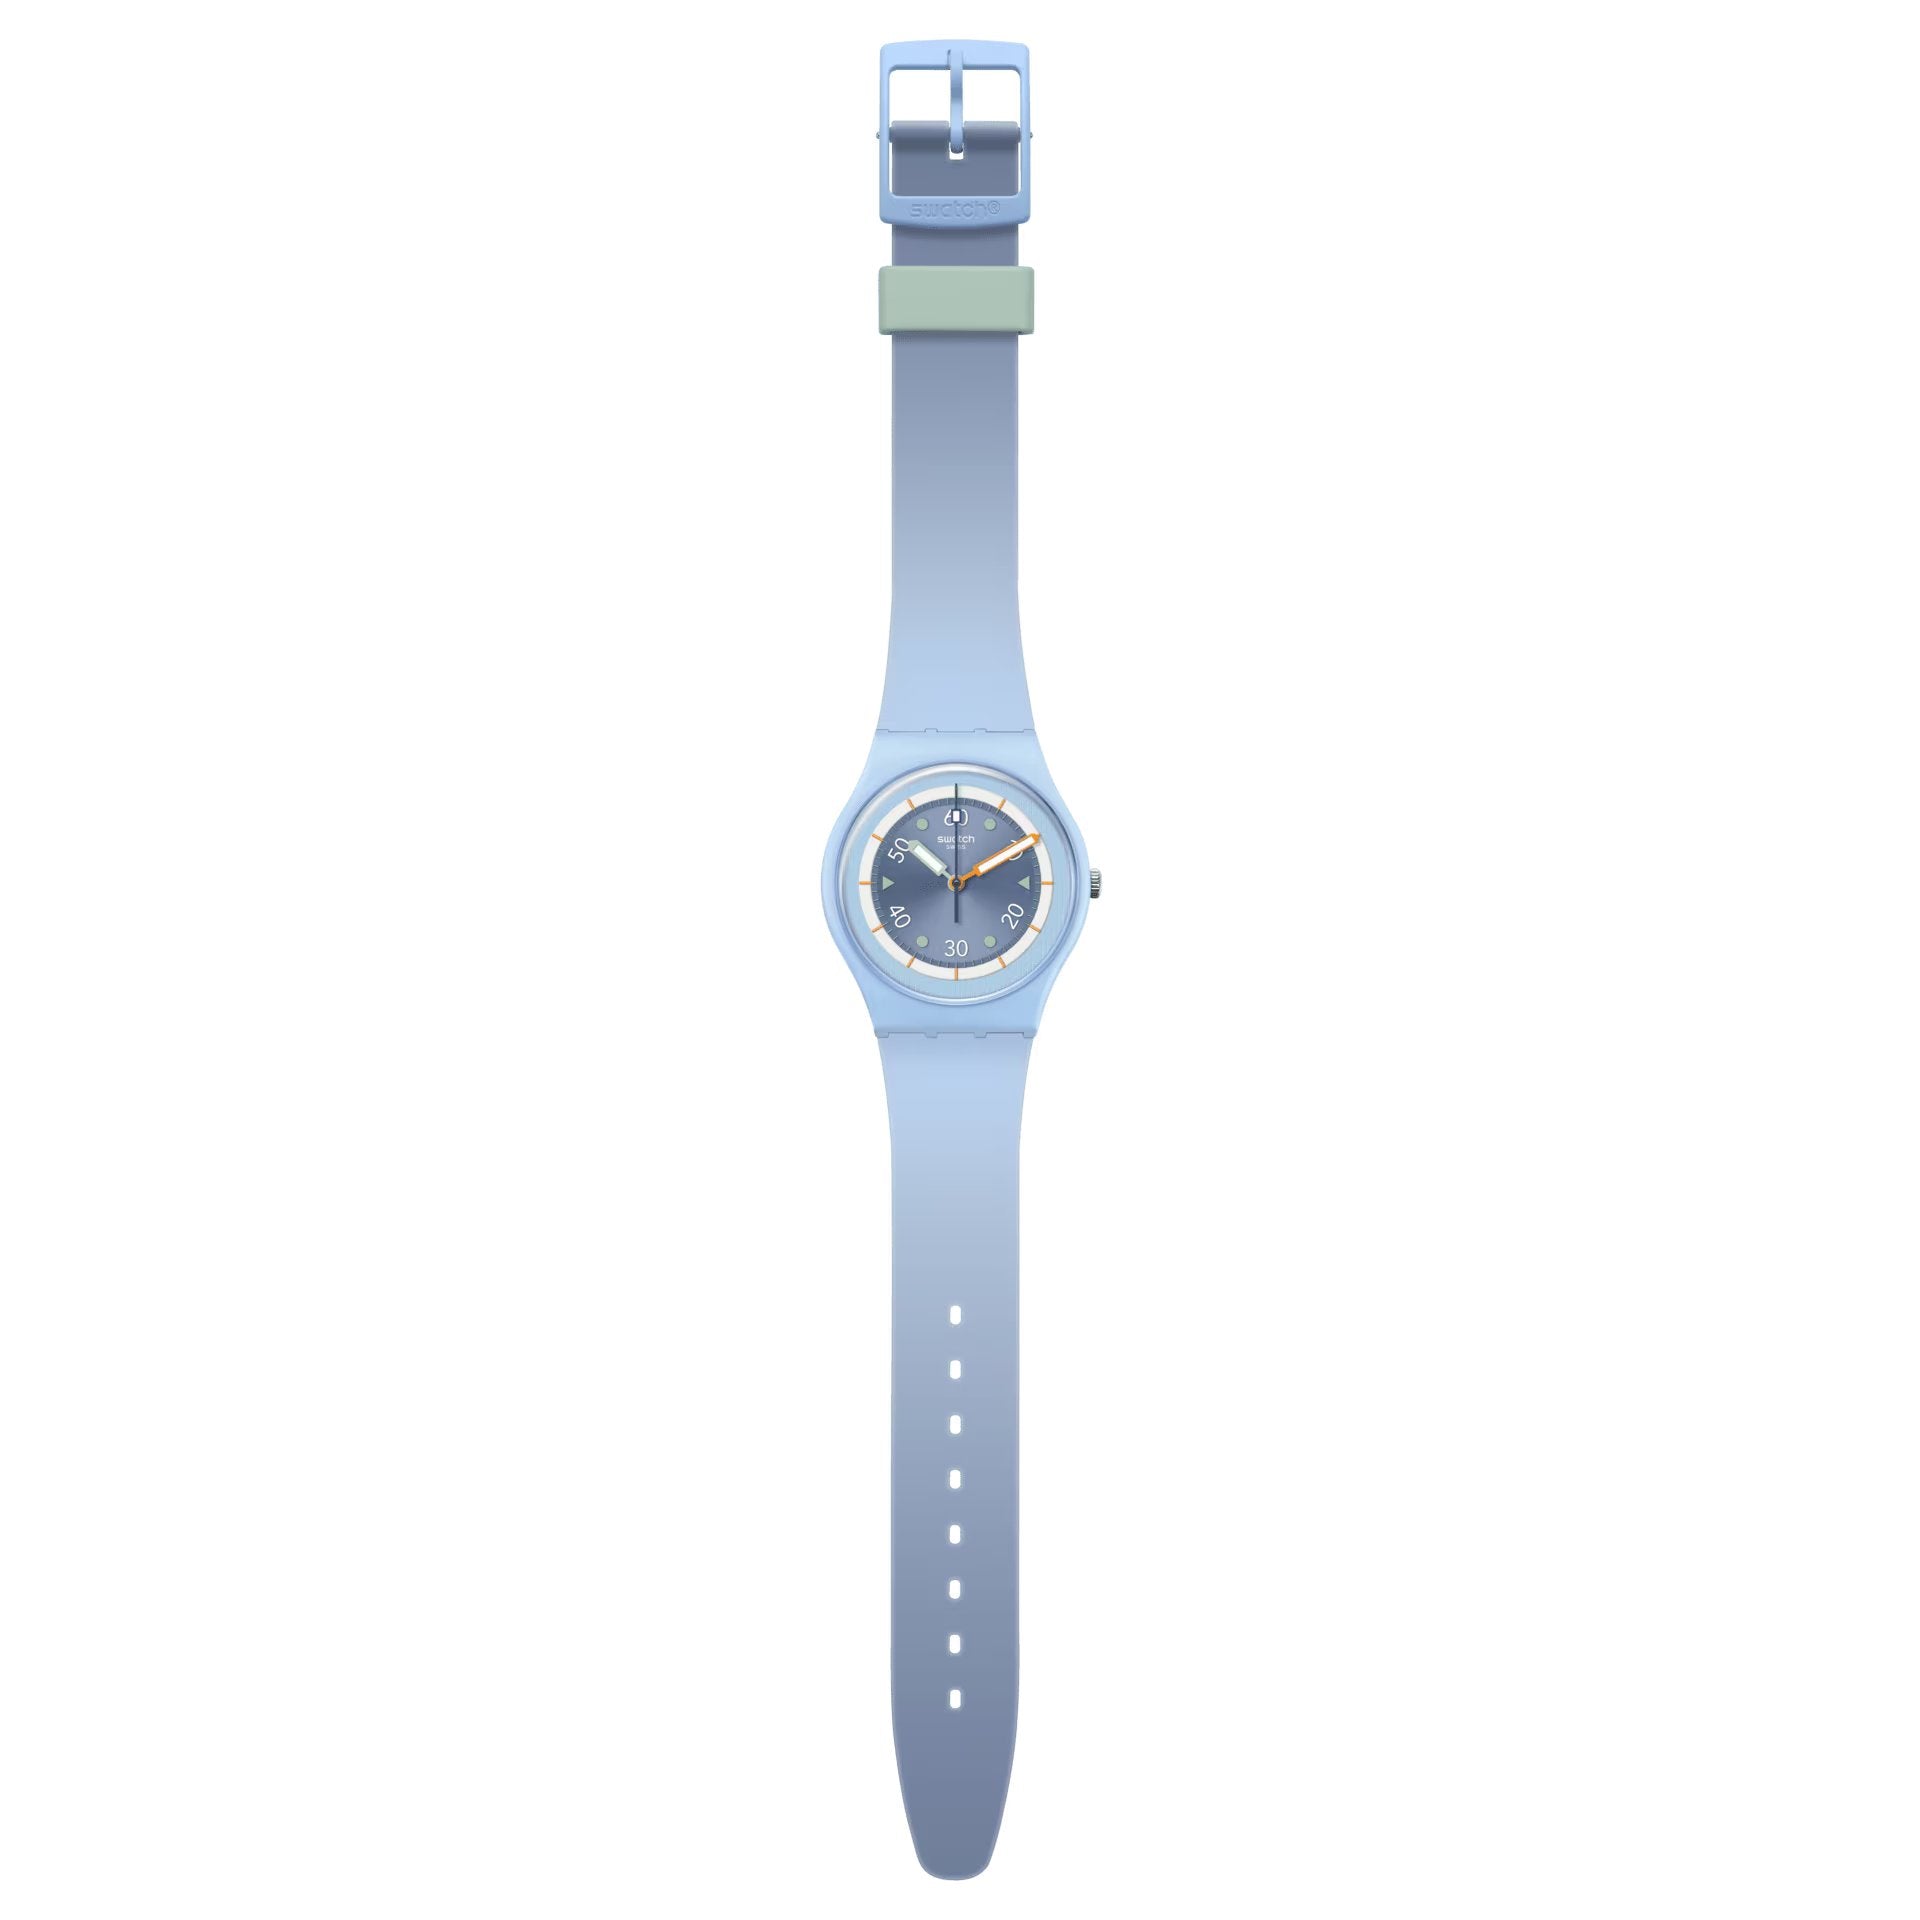 SWATCH POWER OF NATURE FROZEN WATERFALL - SO31L100 - Simmi Gioiellerie -Orologi